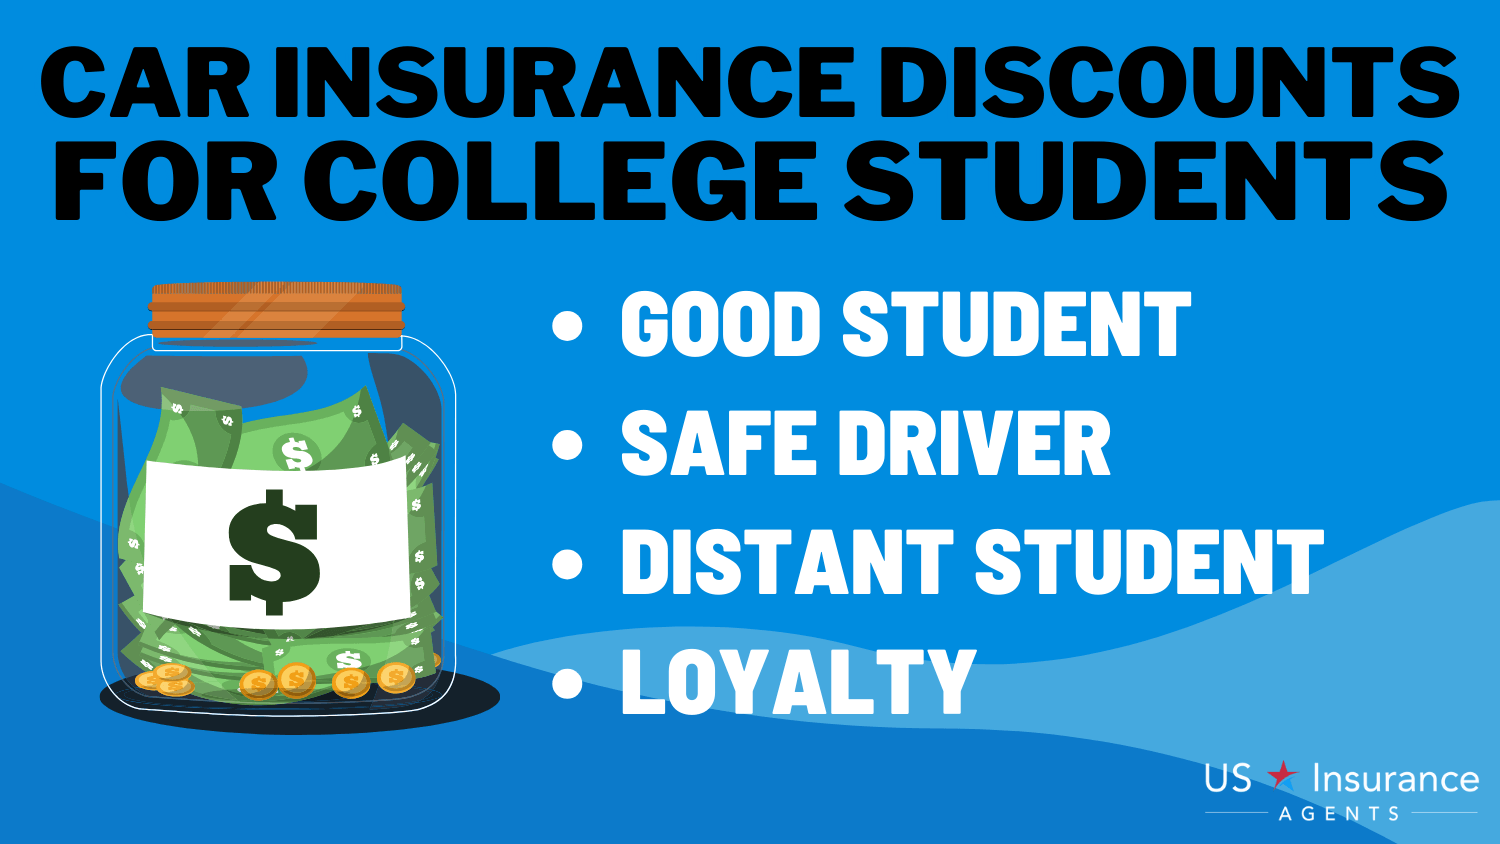 Car Insurance Discounts for College Students: Good Student, Safe Driver, Distant Student, Loyalty